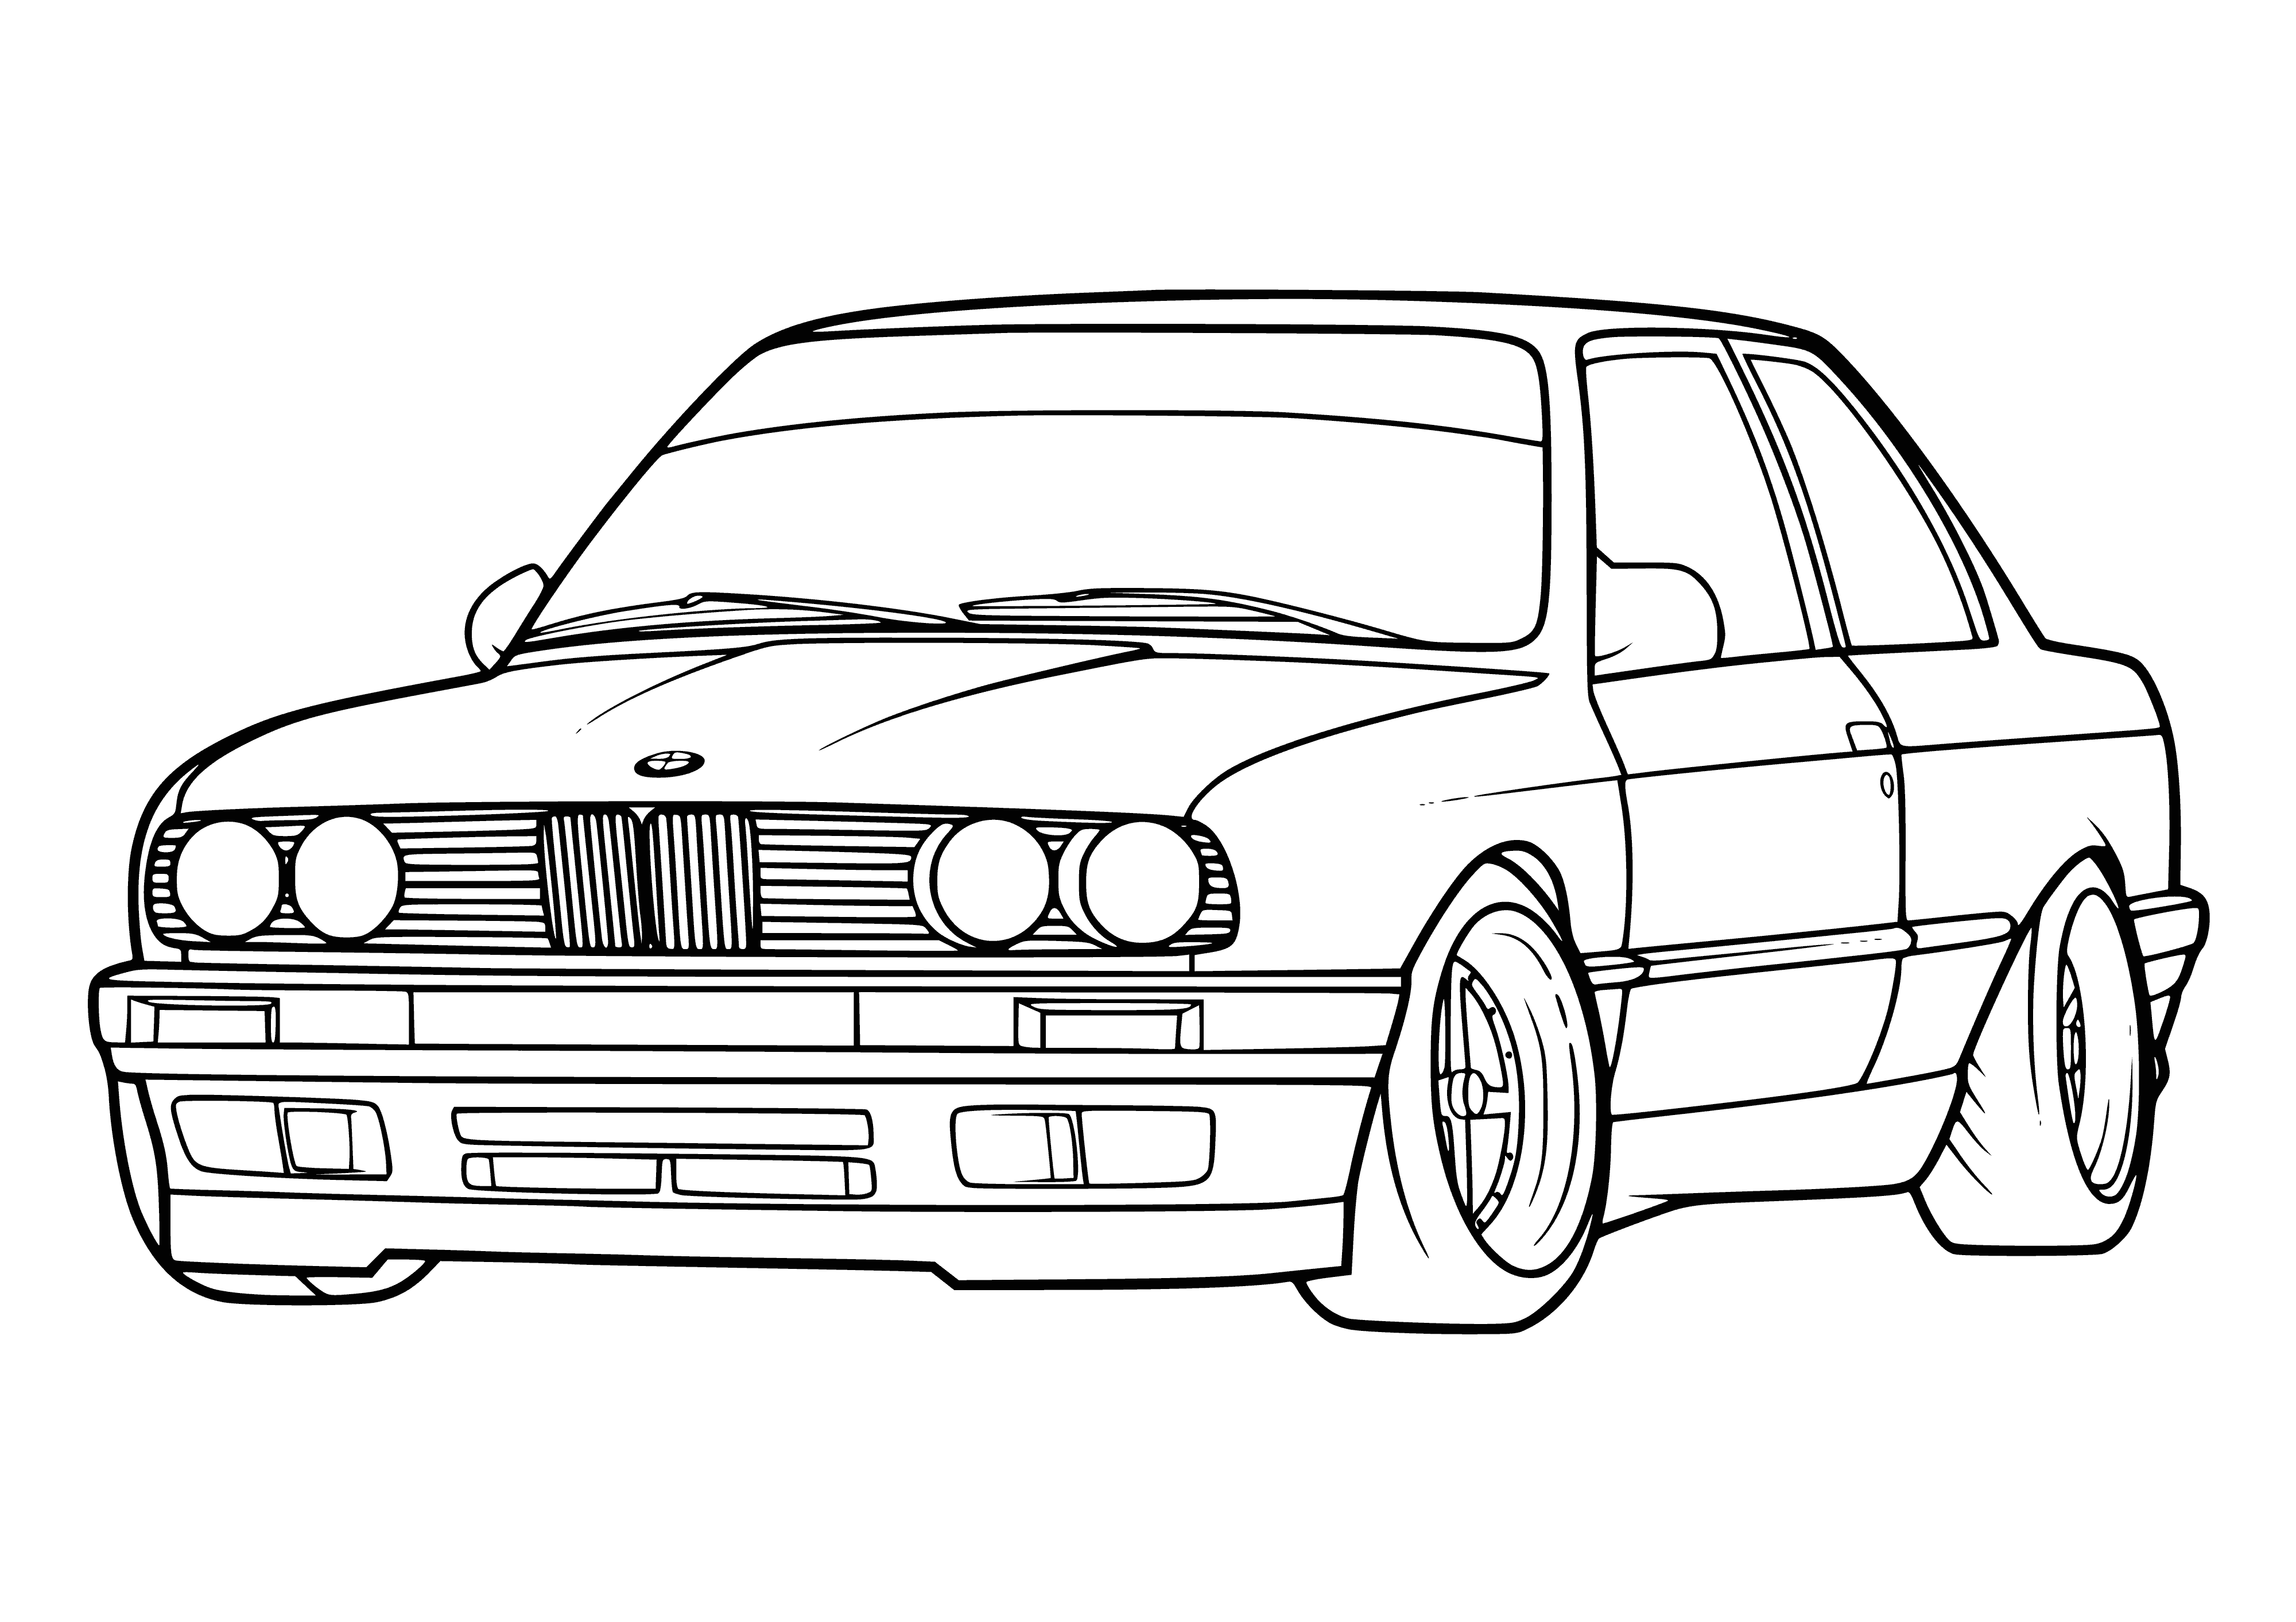 coloring page: Compact four-door car with sleek design, long hood, large round headlights, chrome handles, tinted windows, alloy wheels, and sunroof. BMW logo center of grille.